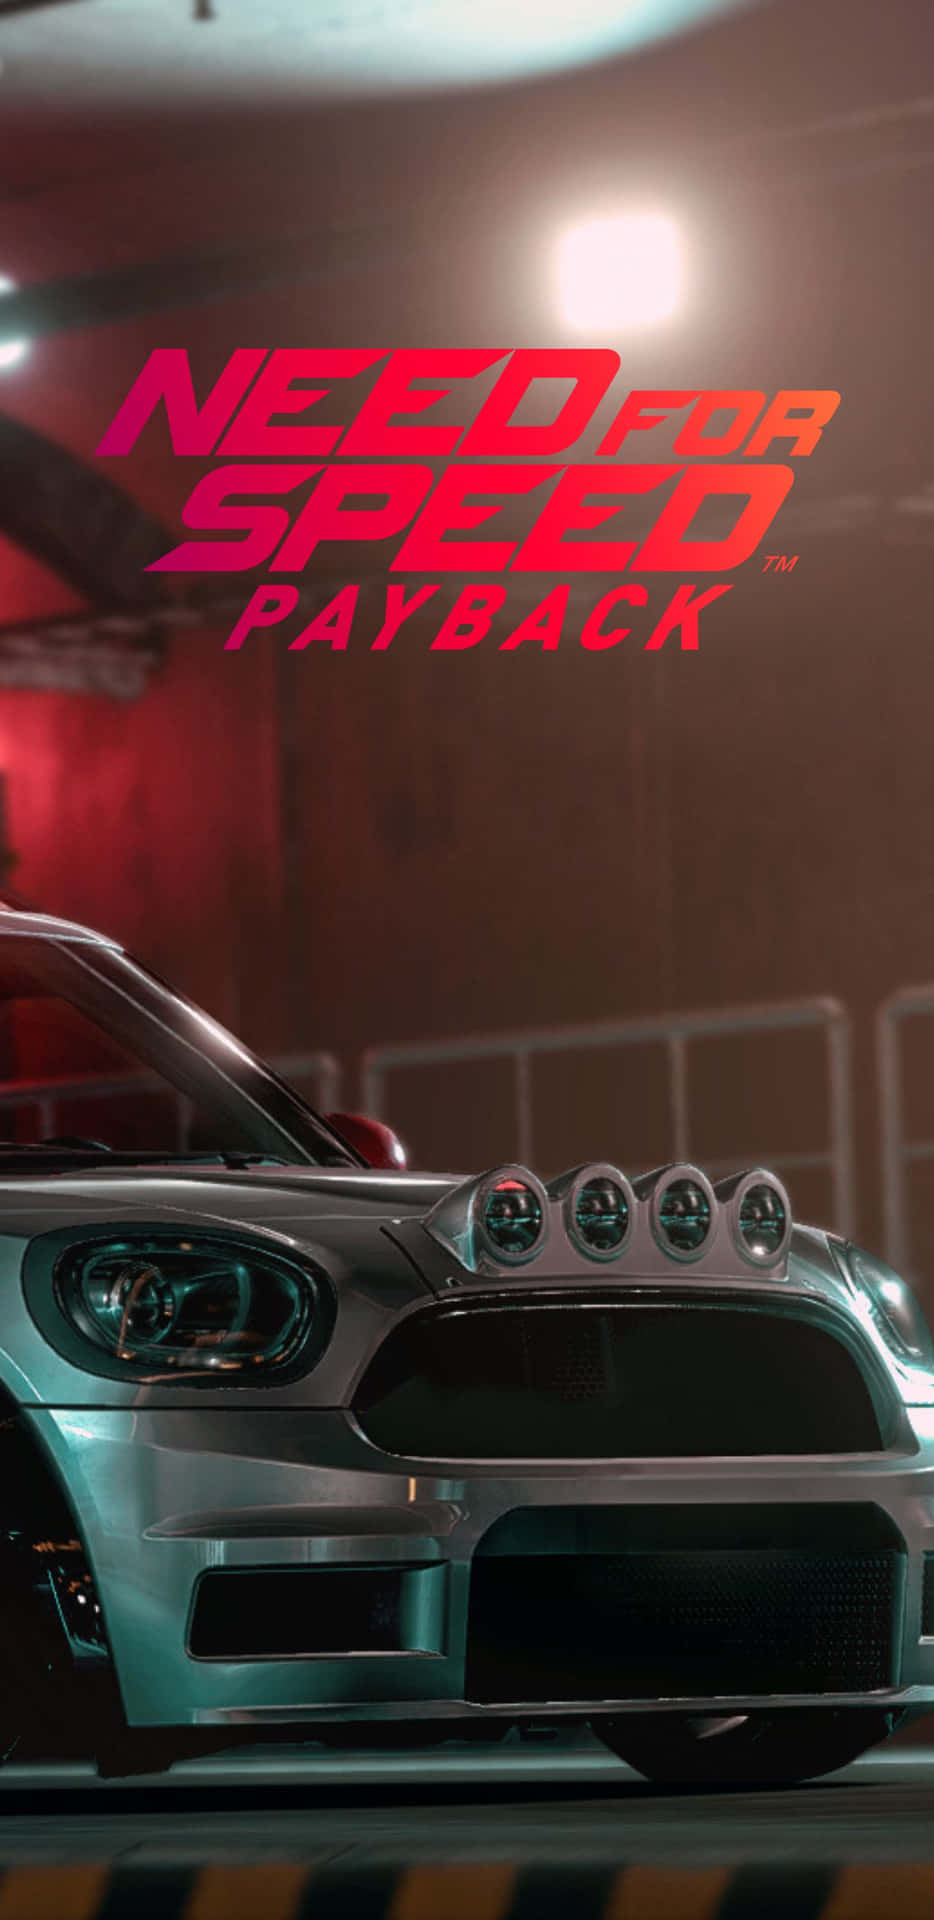 Enjoy the thrill of Need For Speed Payback on Pixel 3xl